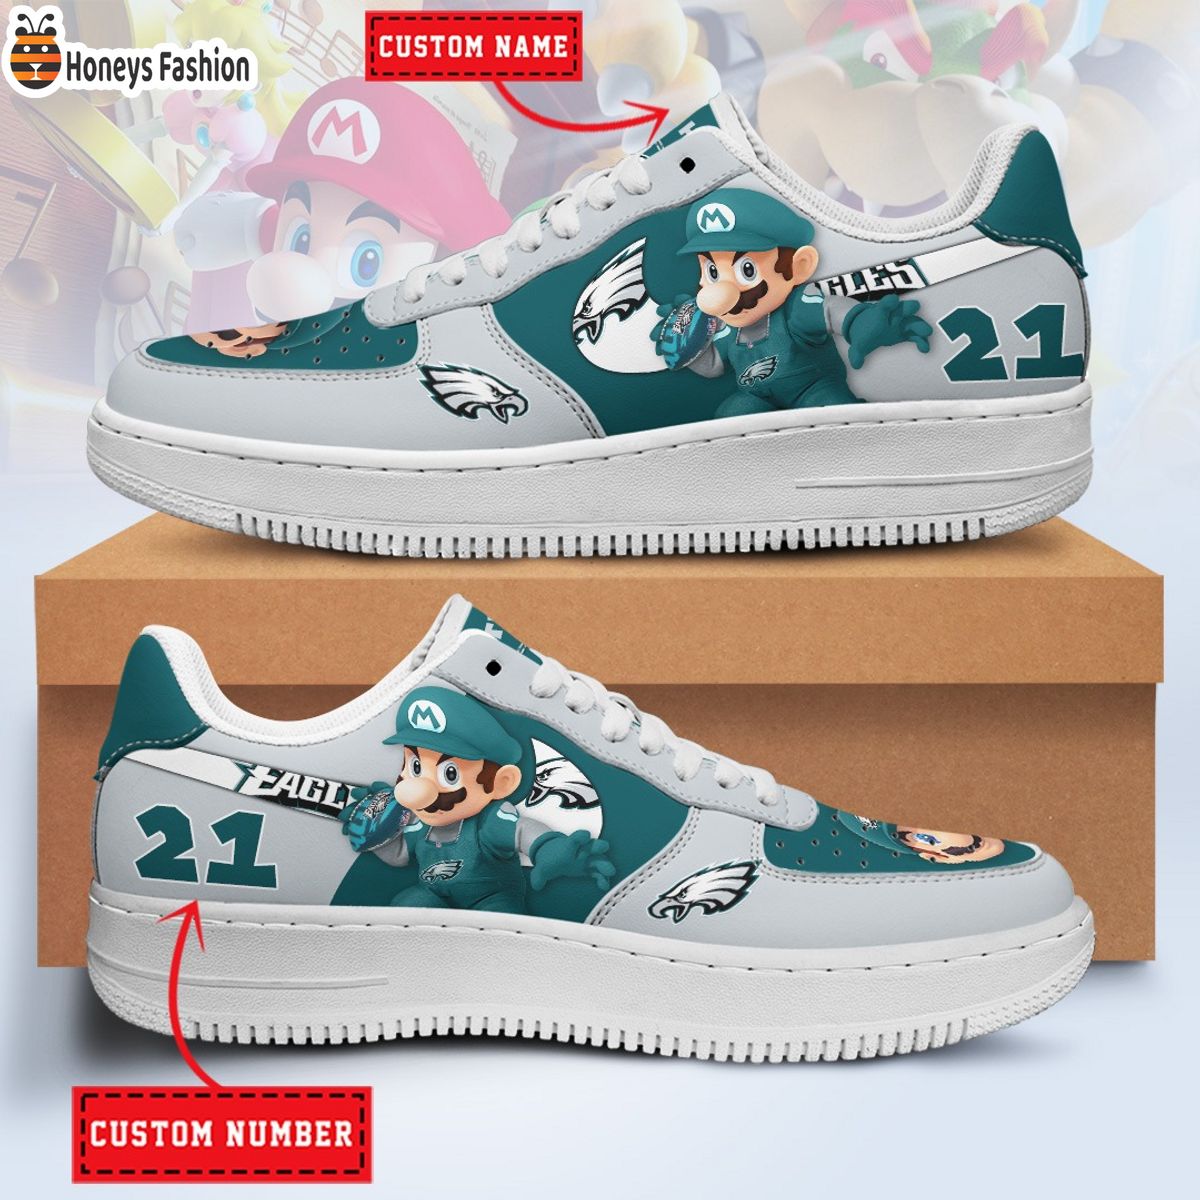 Philadelphia Eagles Mario NFL Personalized Air Force 1 Shoes